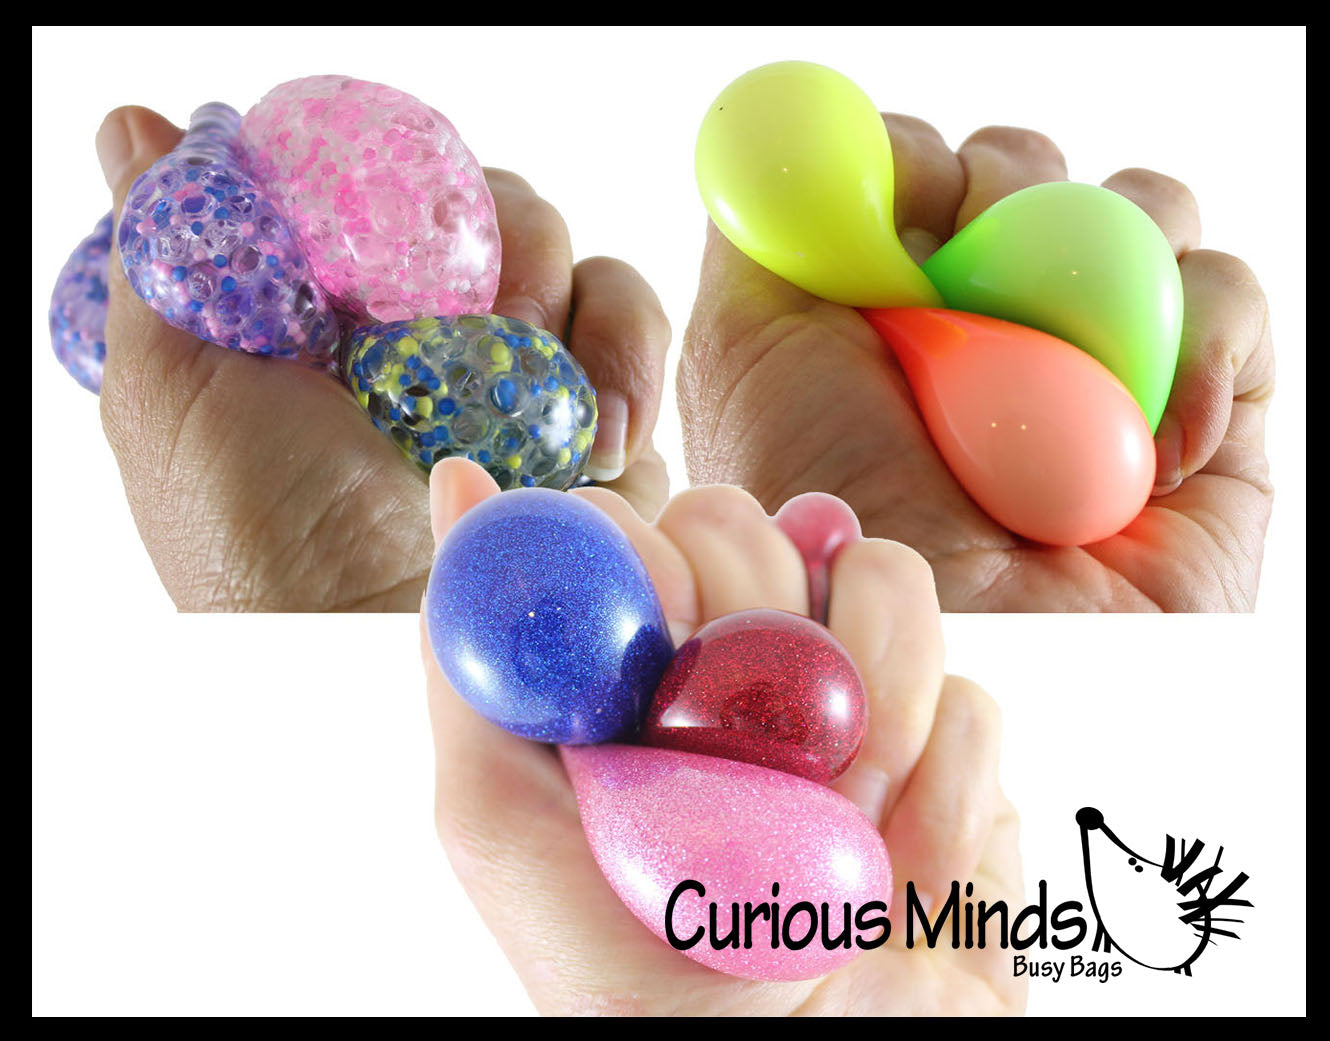 Set of 9 Mini Stress Balls - 3 Different Styles in 3 Packs - of Small Amazing 1.5